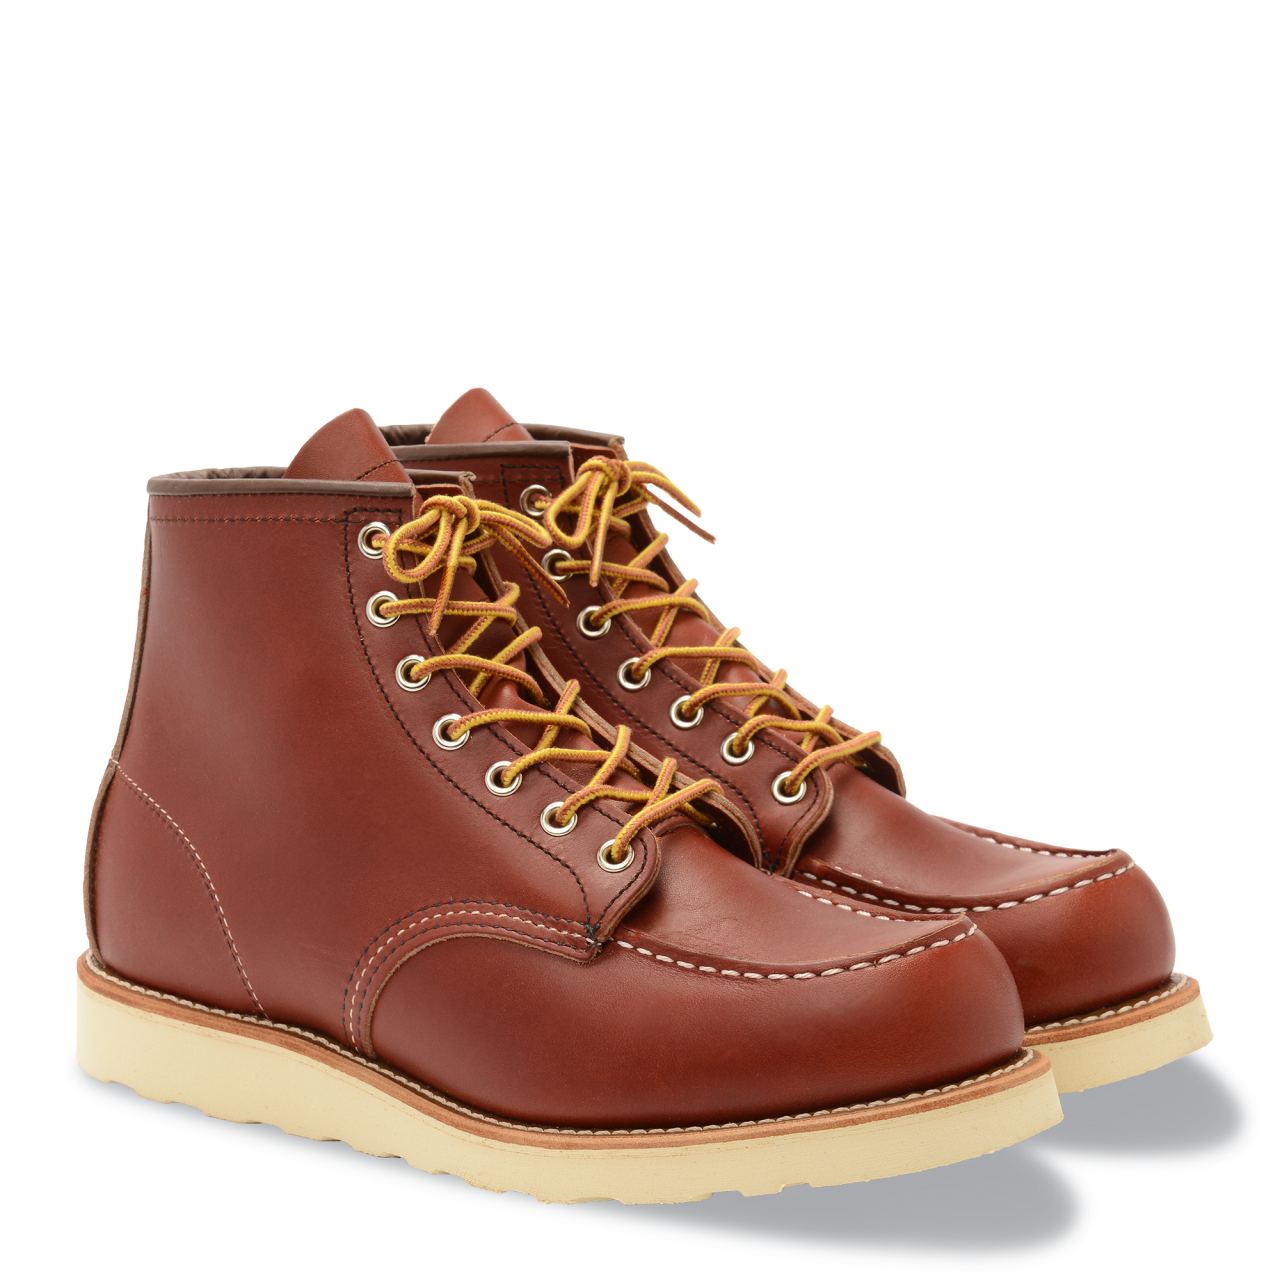 Red Wing 8131 Moc Toe